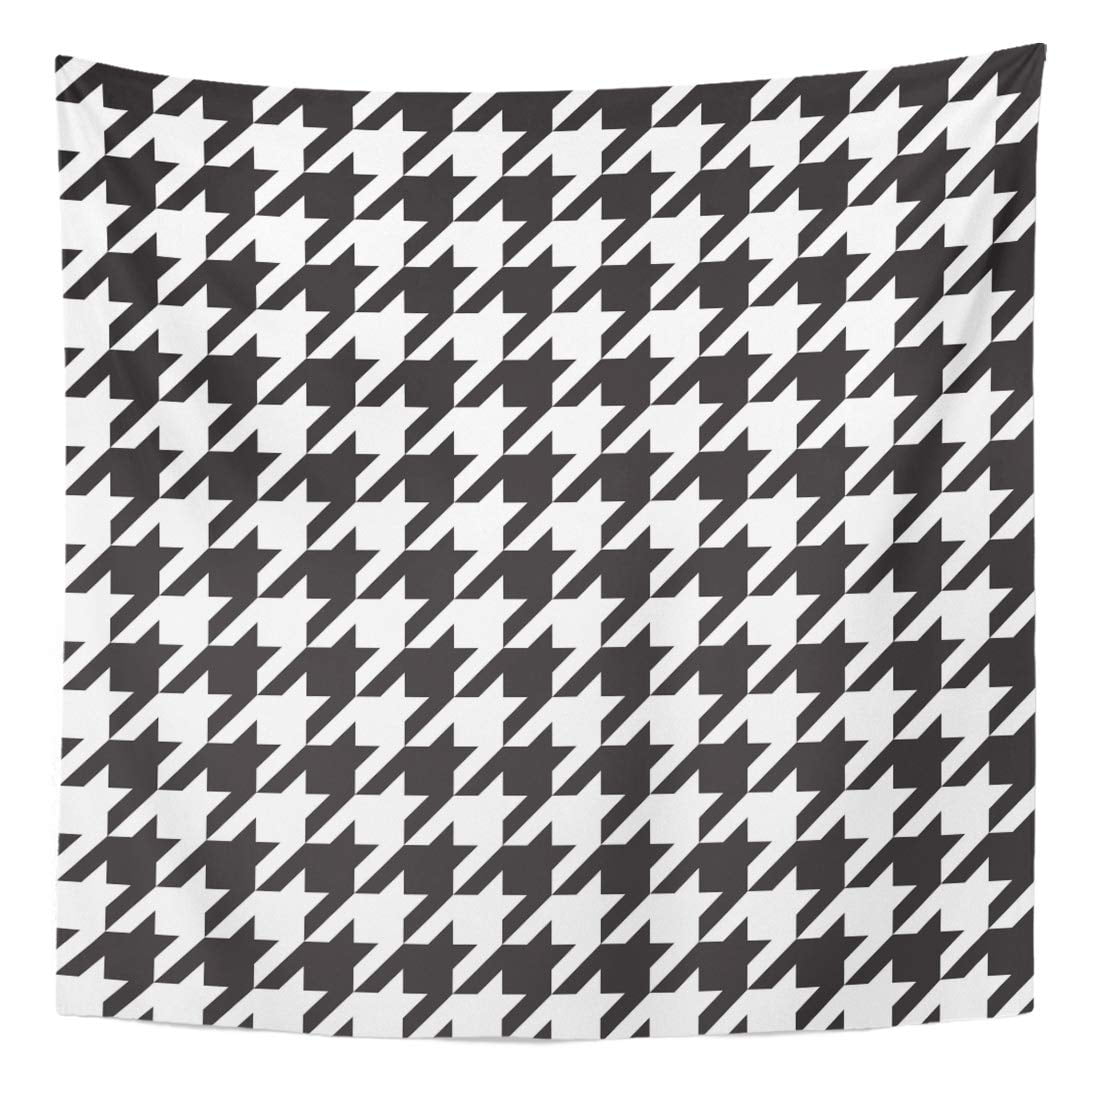 ZEALGNED Hound Houndstooth Pattern Tooth Dogtooth Check Dogstooth Plaid ...